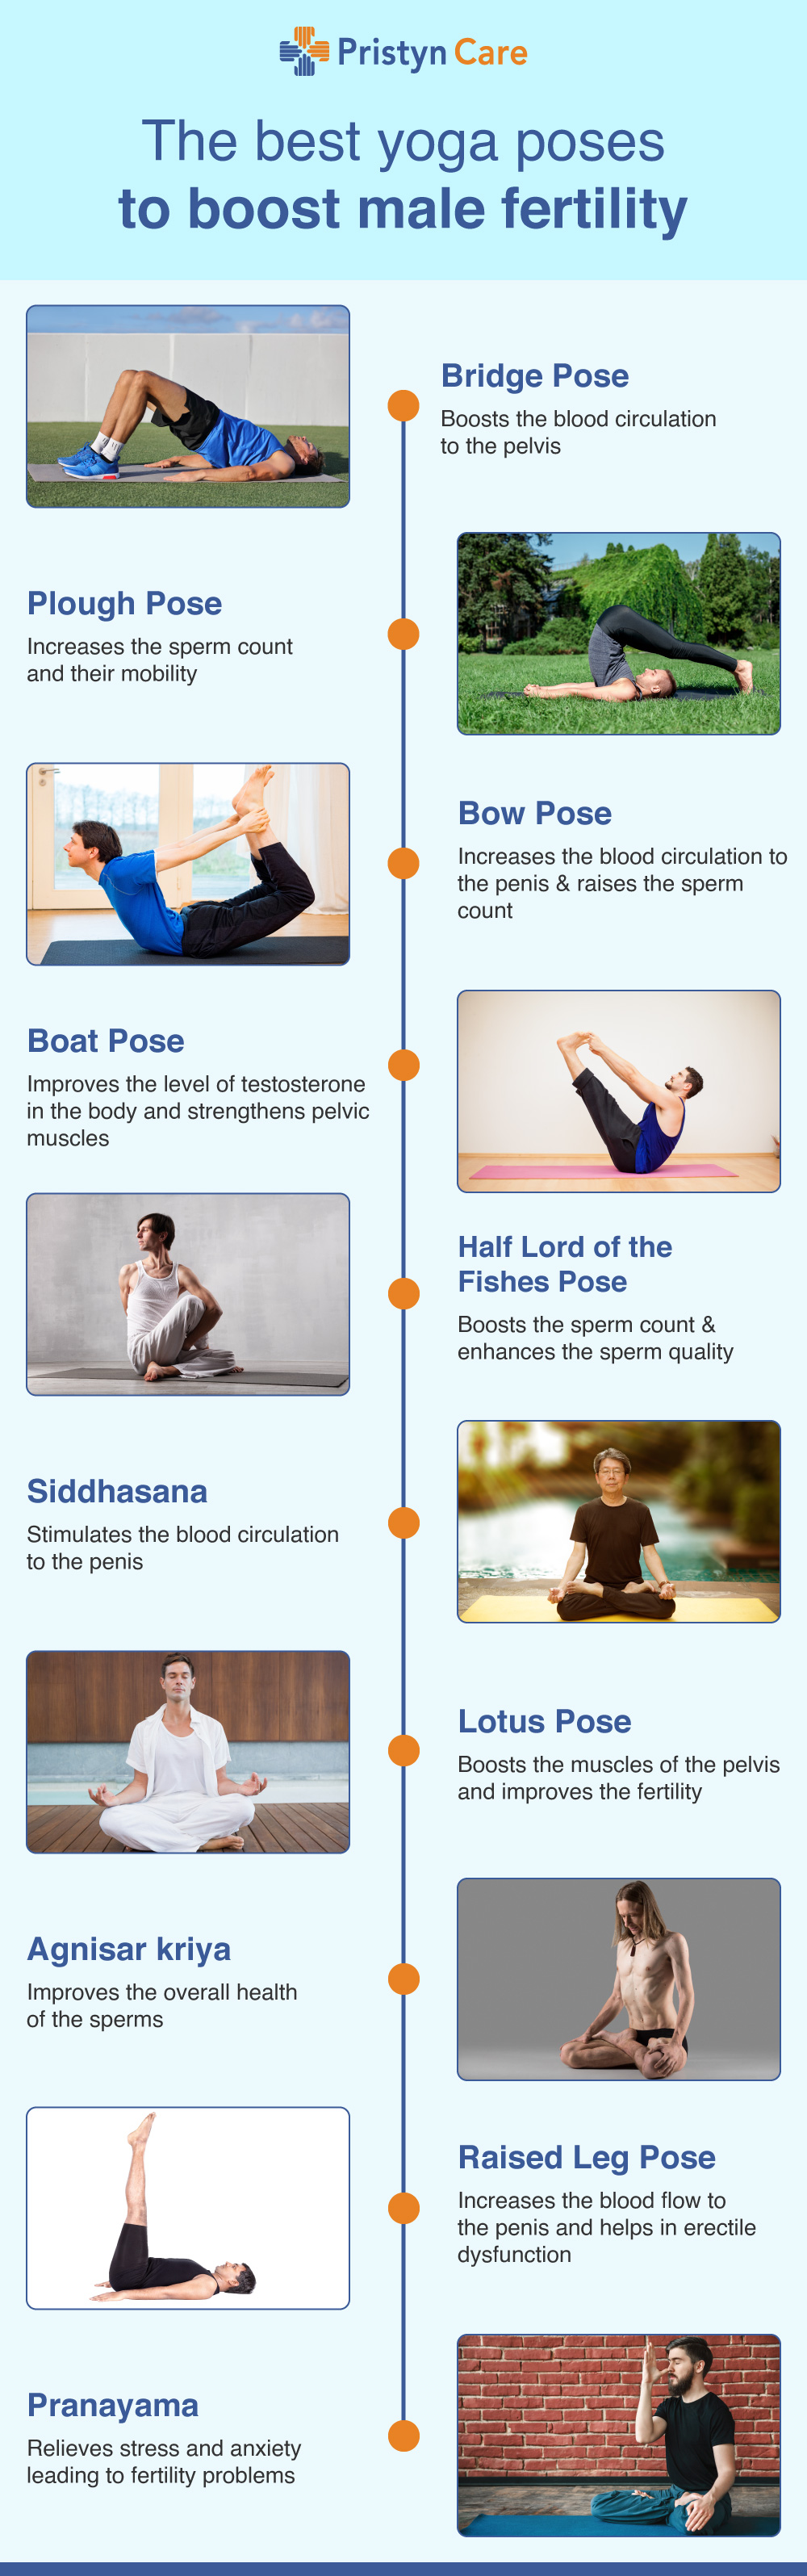 50 Different Yoga Asanas That Every Beginner Should Know | Styles At Life